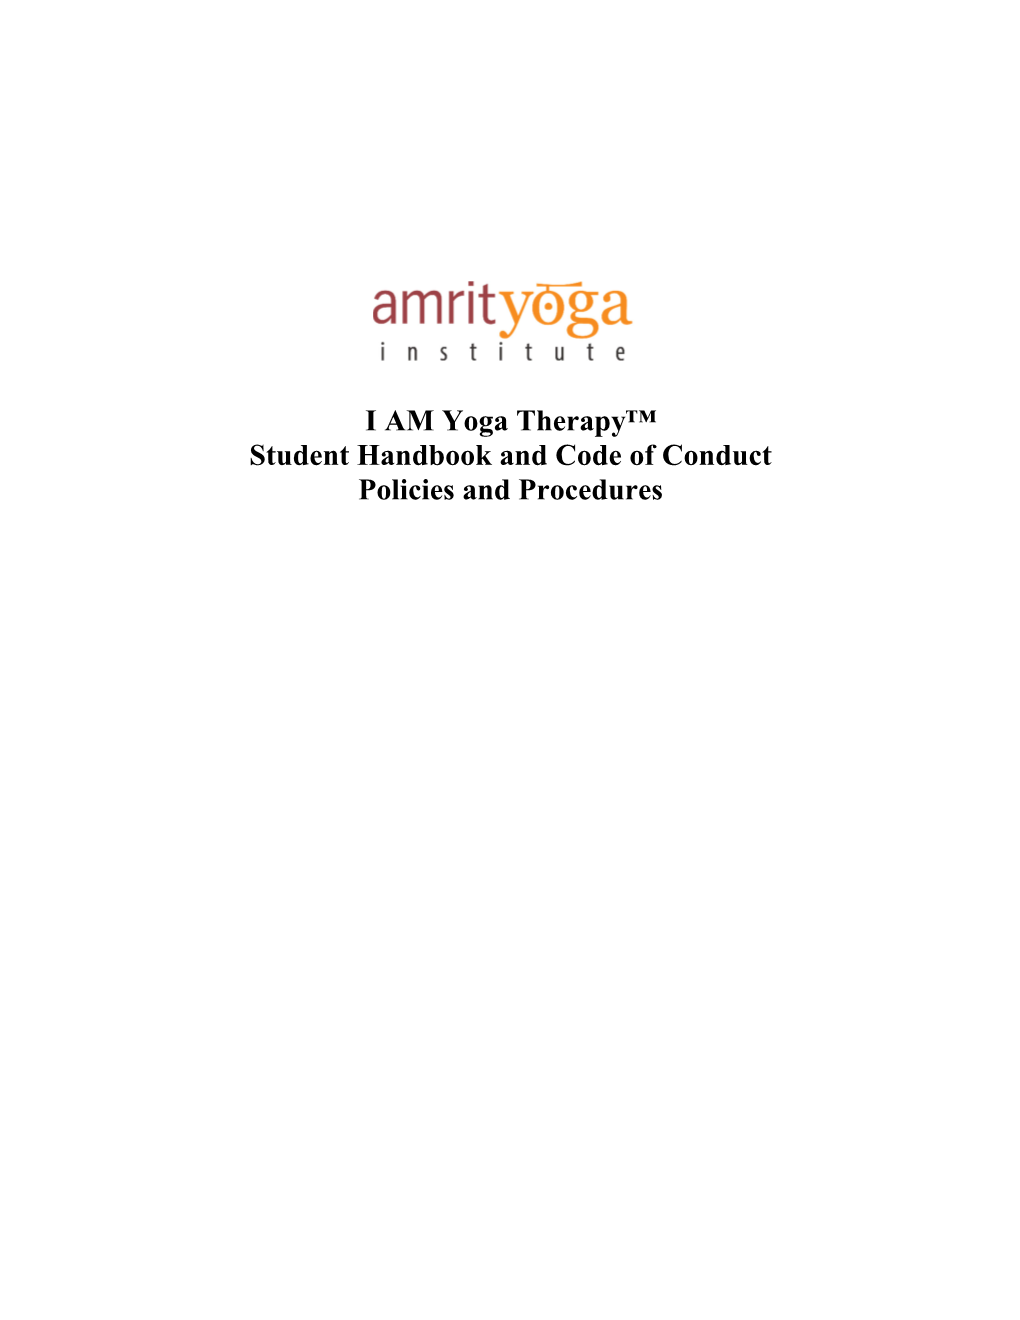 I AM Yoga Therapy™ Student Handbook and Code of Conduct Policies and Procedures